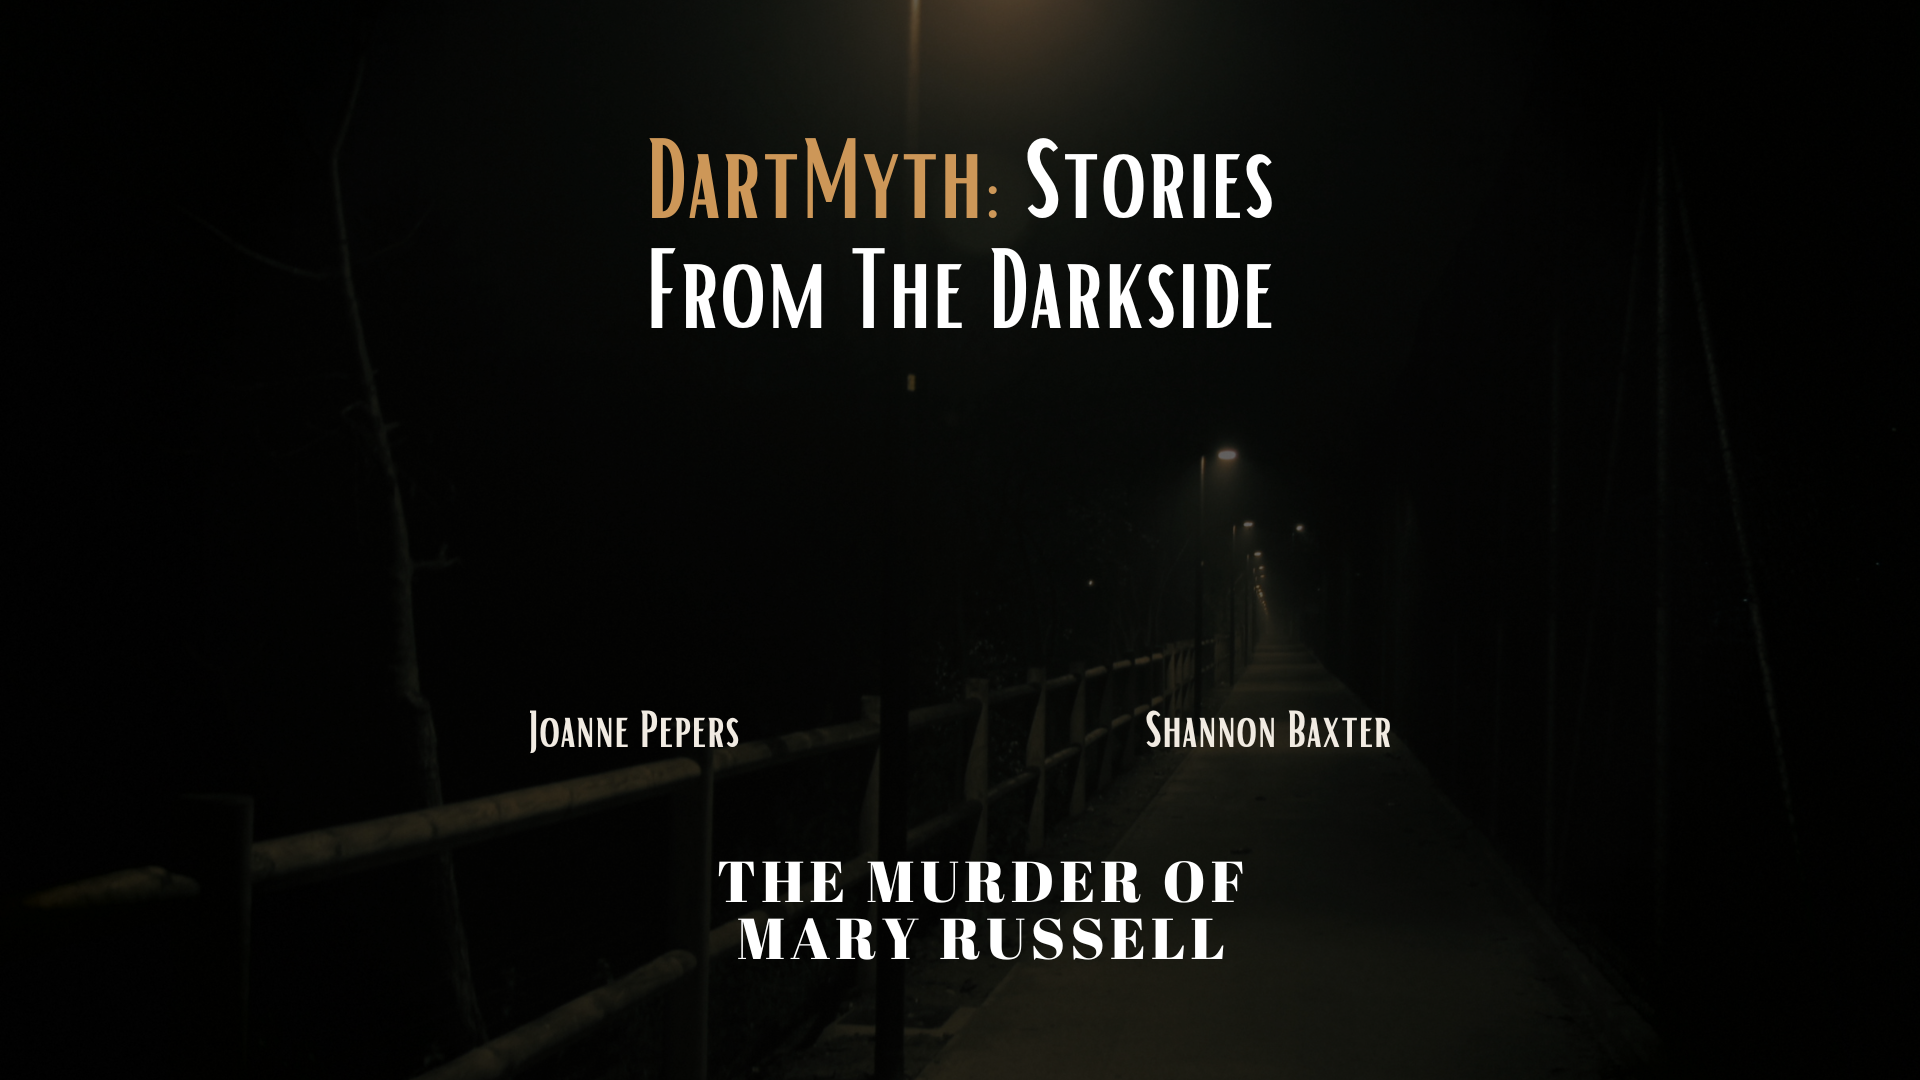 DartMyth: Stories from the Darkside / Shannon Baxter / Joanne Pepers / The Murder of Mary Russell